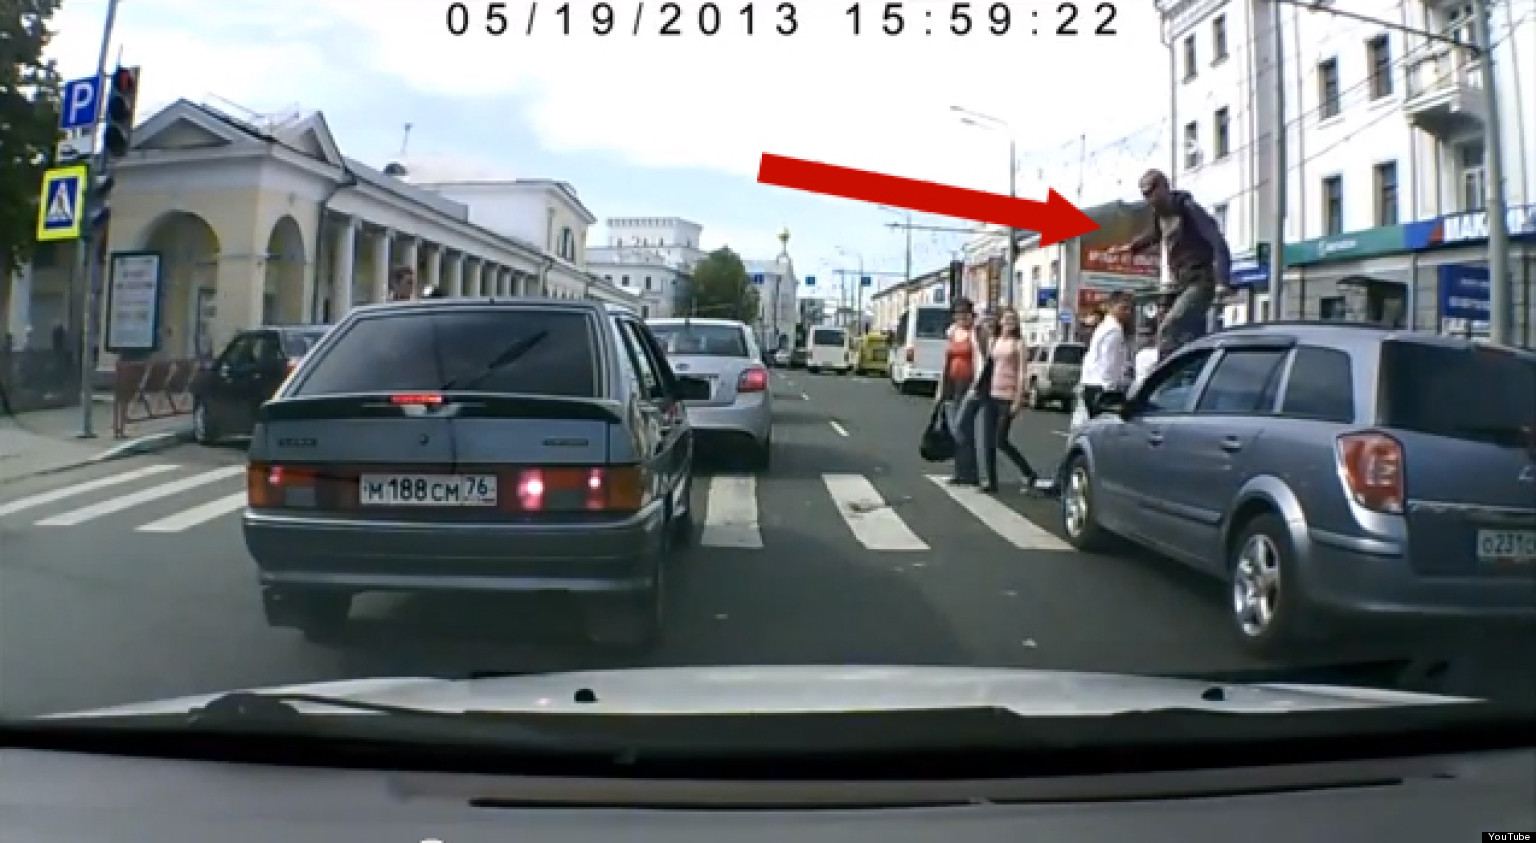 Pedestrian Walks On Car Hood: Payback For Driver Stopped In Crosswalk ...